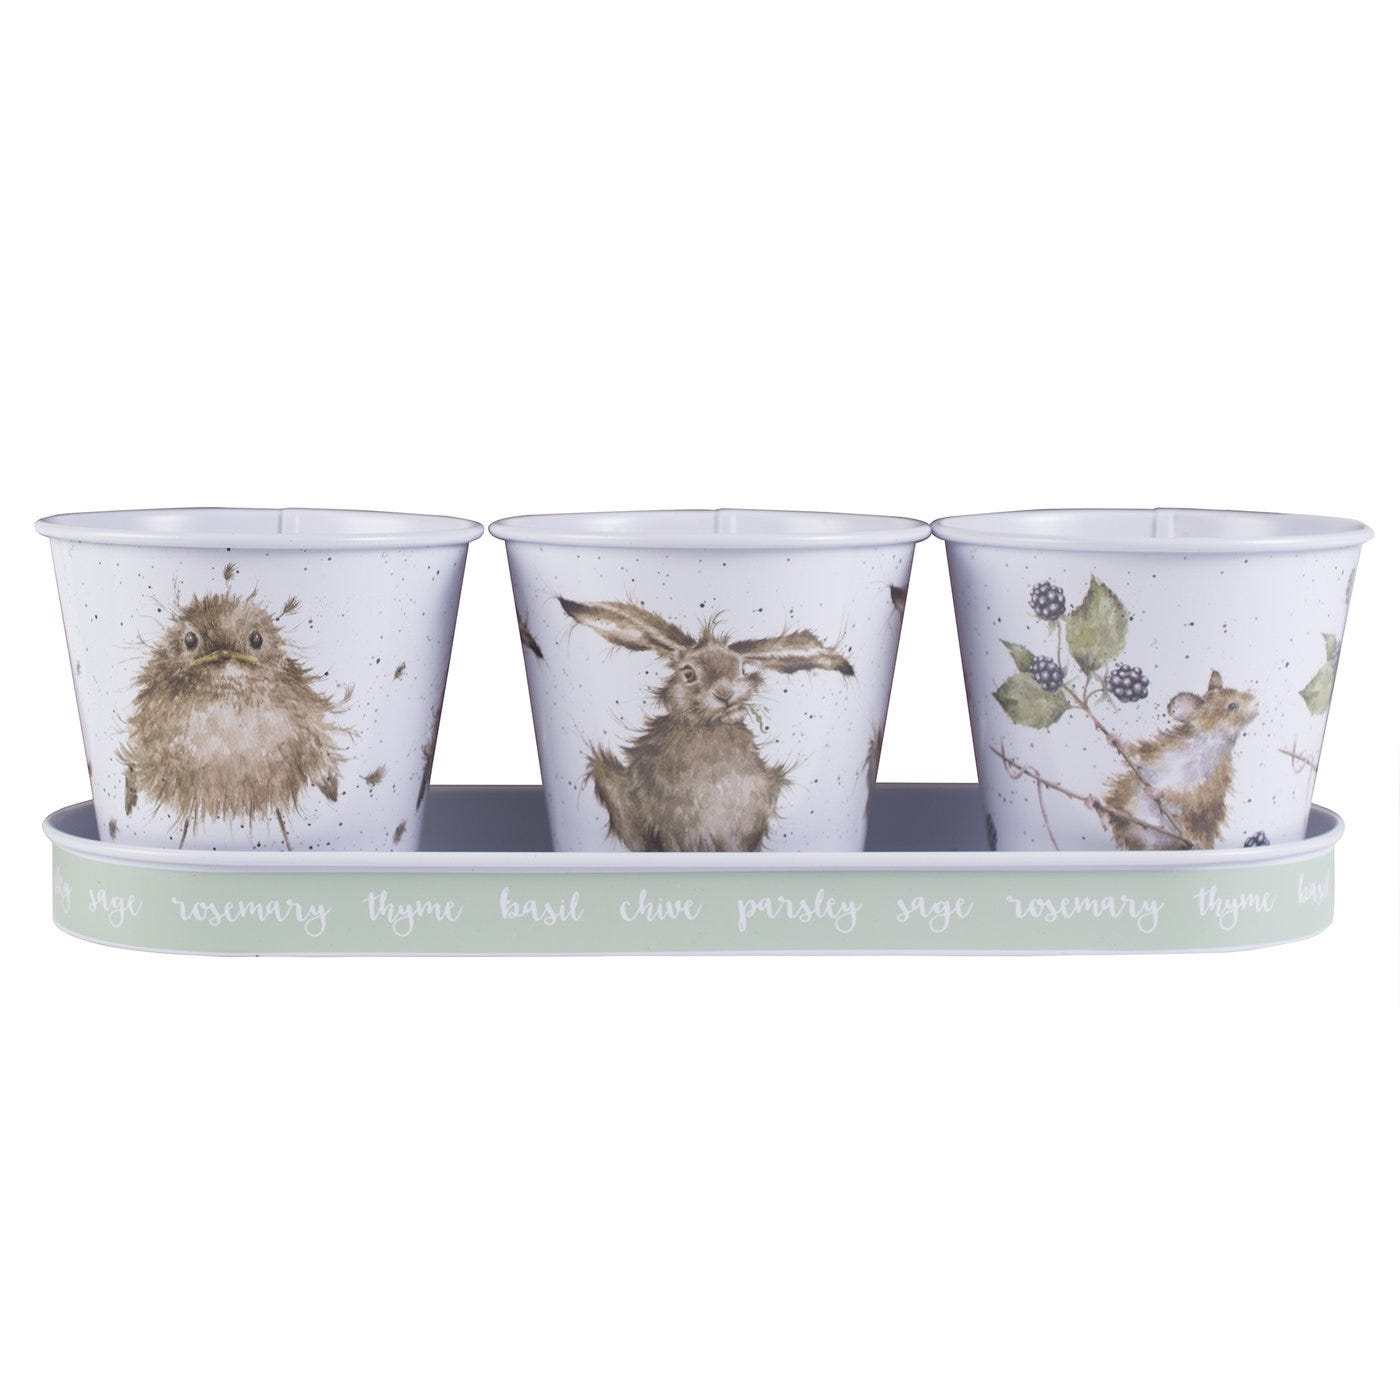 Royal Worcester Wrendale Designs Herb Pots and Tray